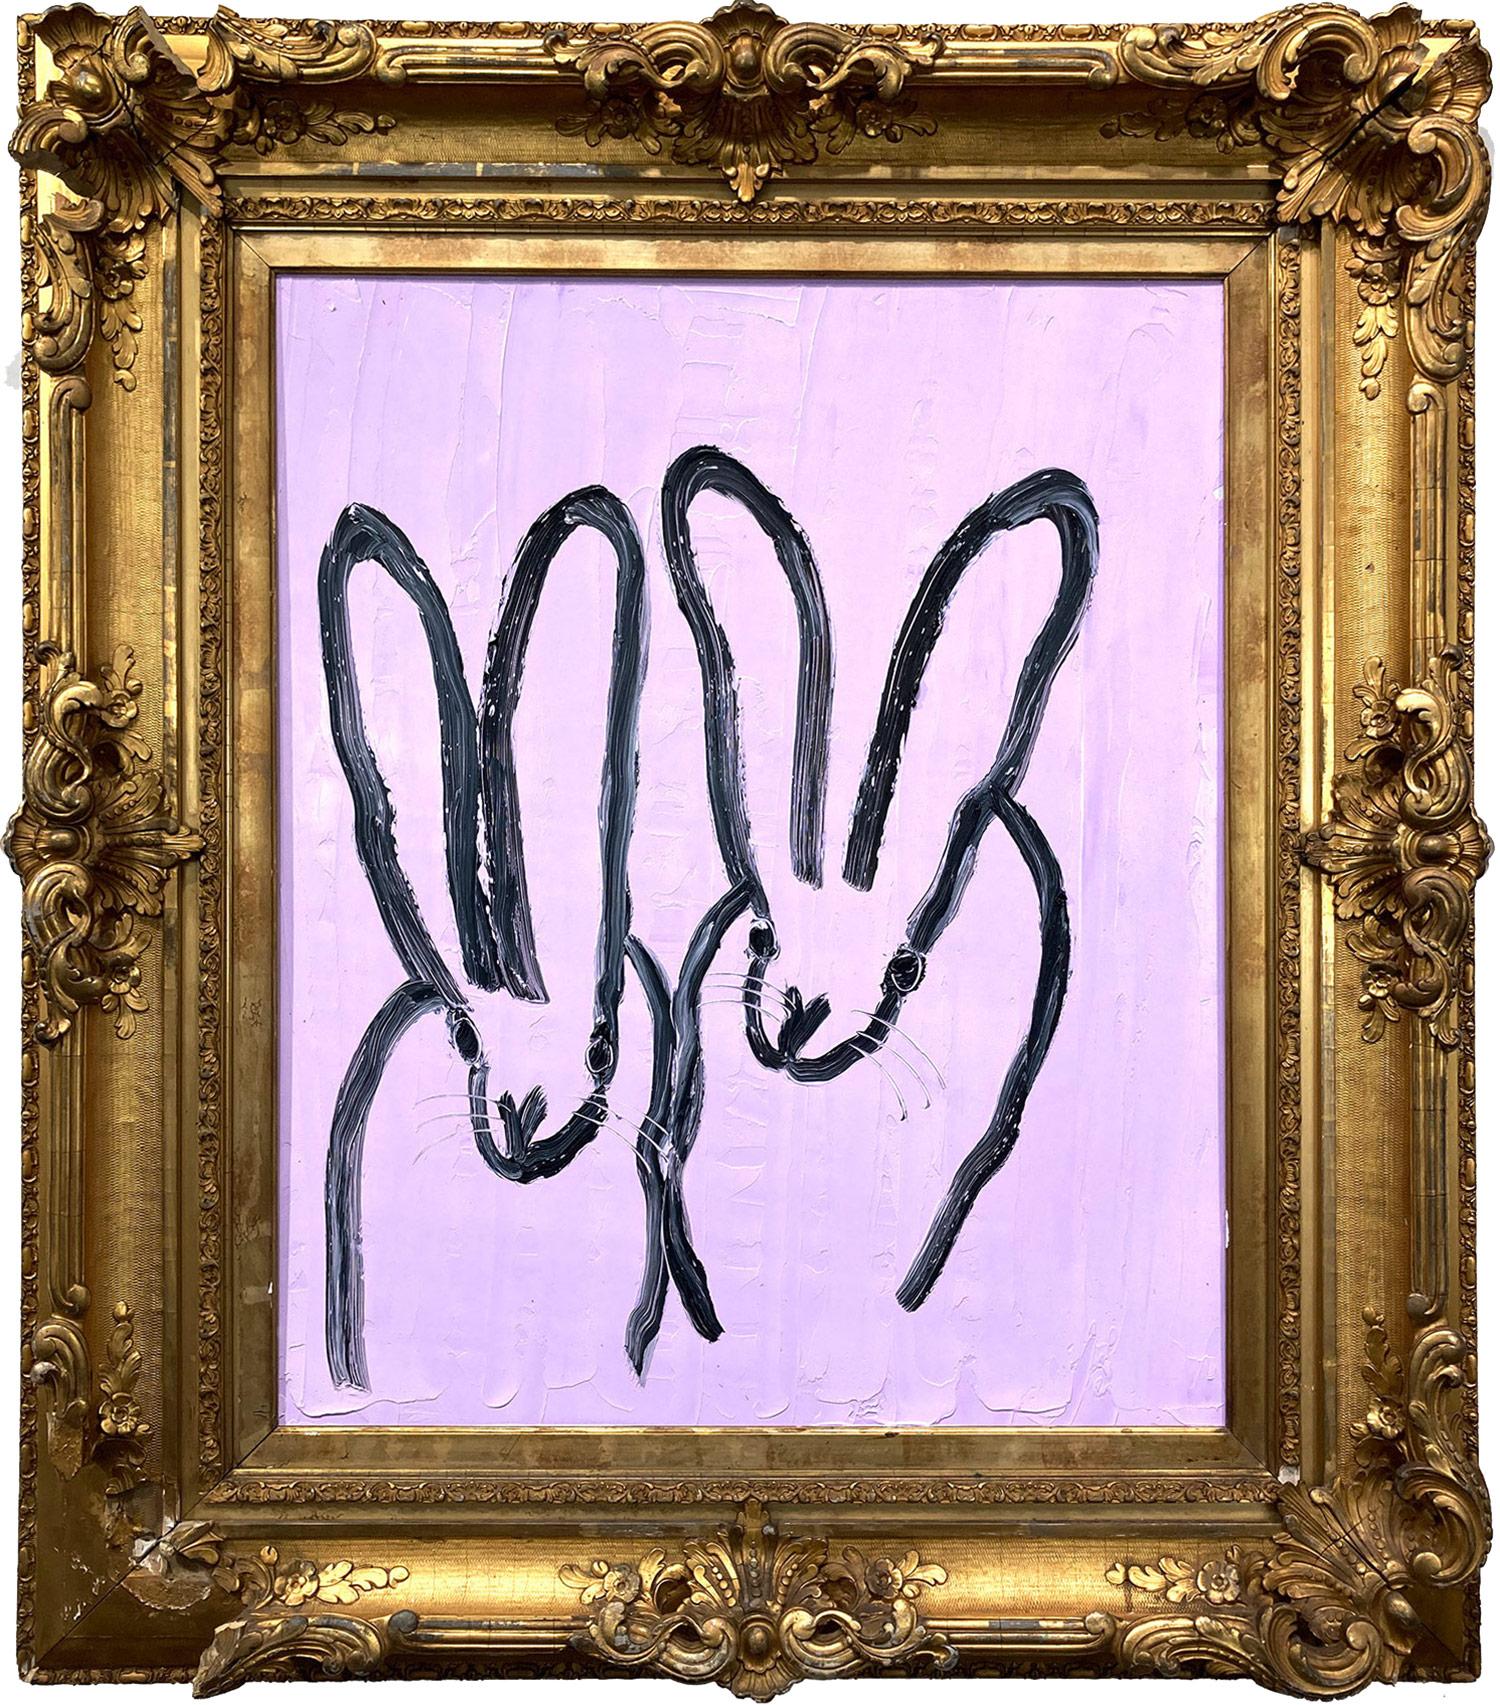 Hunt Slonem Abstract Painting - "Lavendar" 2 Bunnies on Lavender Background Oil Painting in Antique Frame